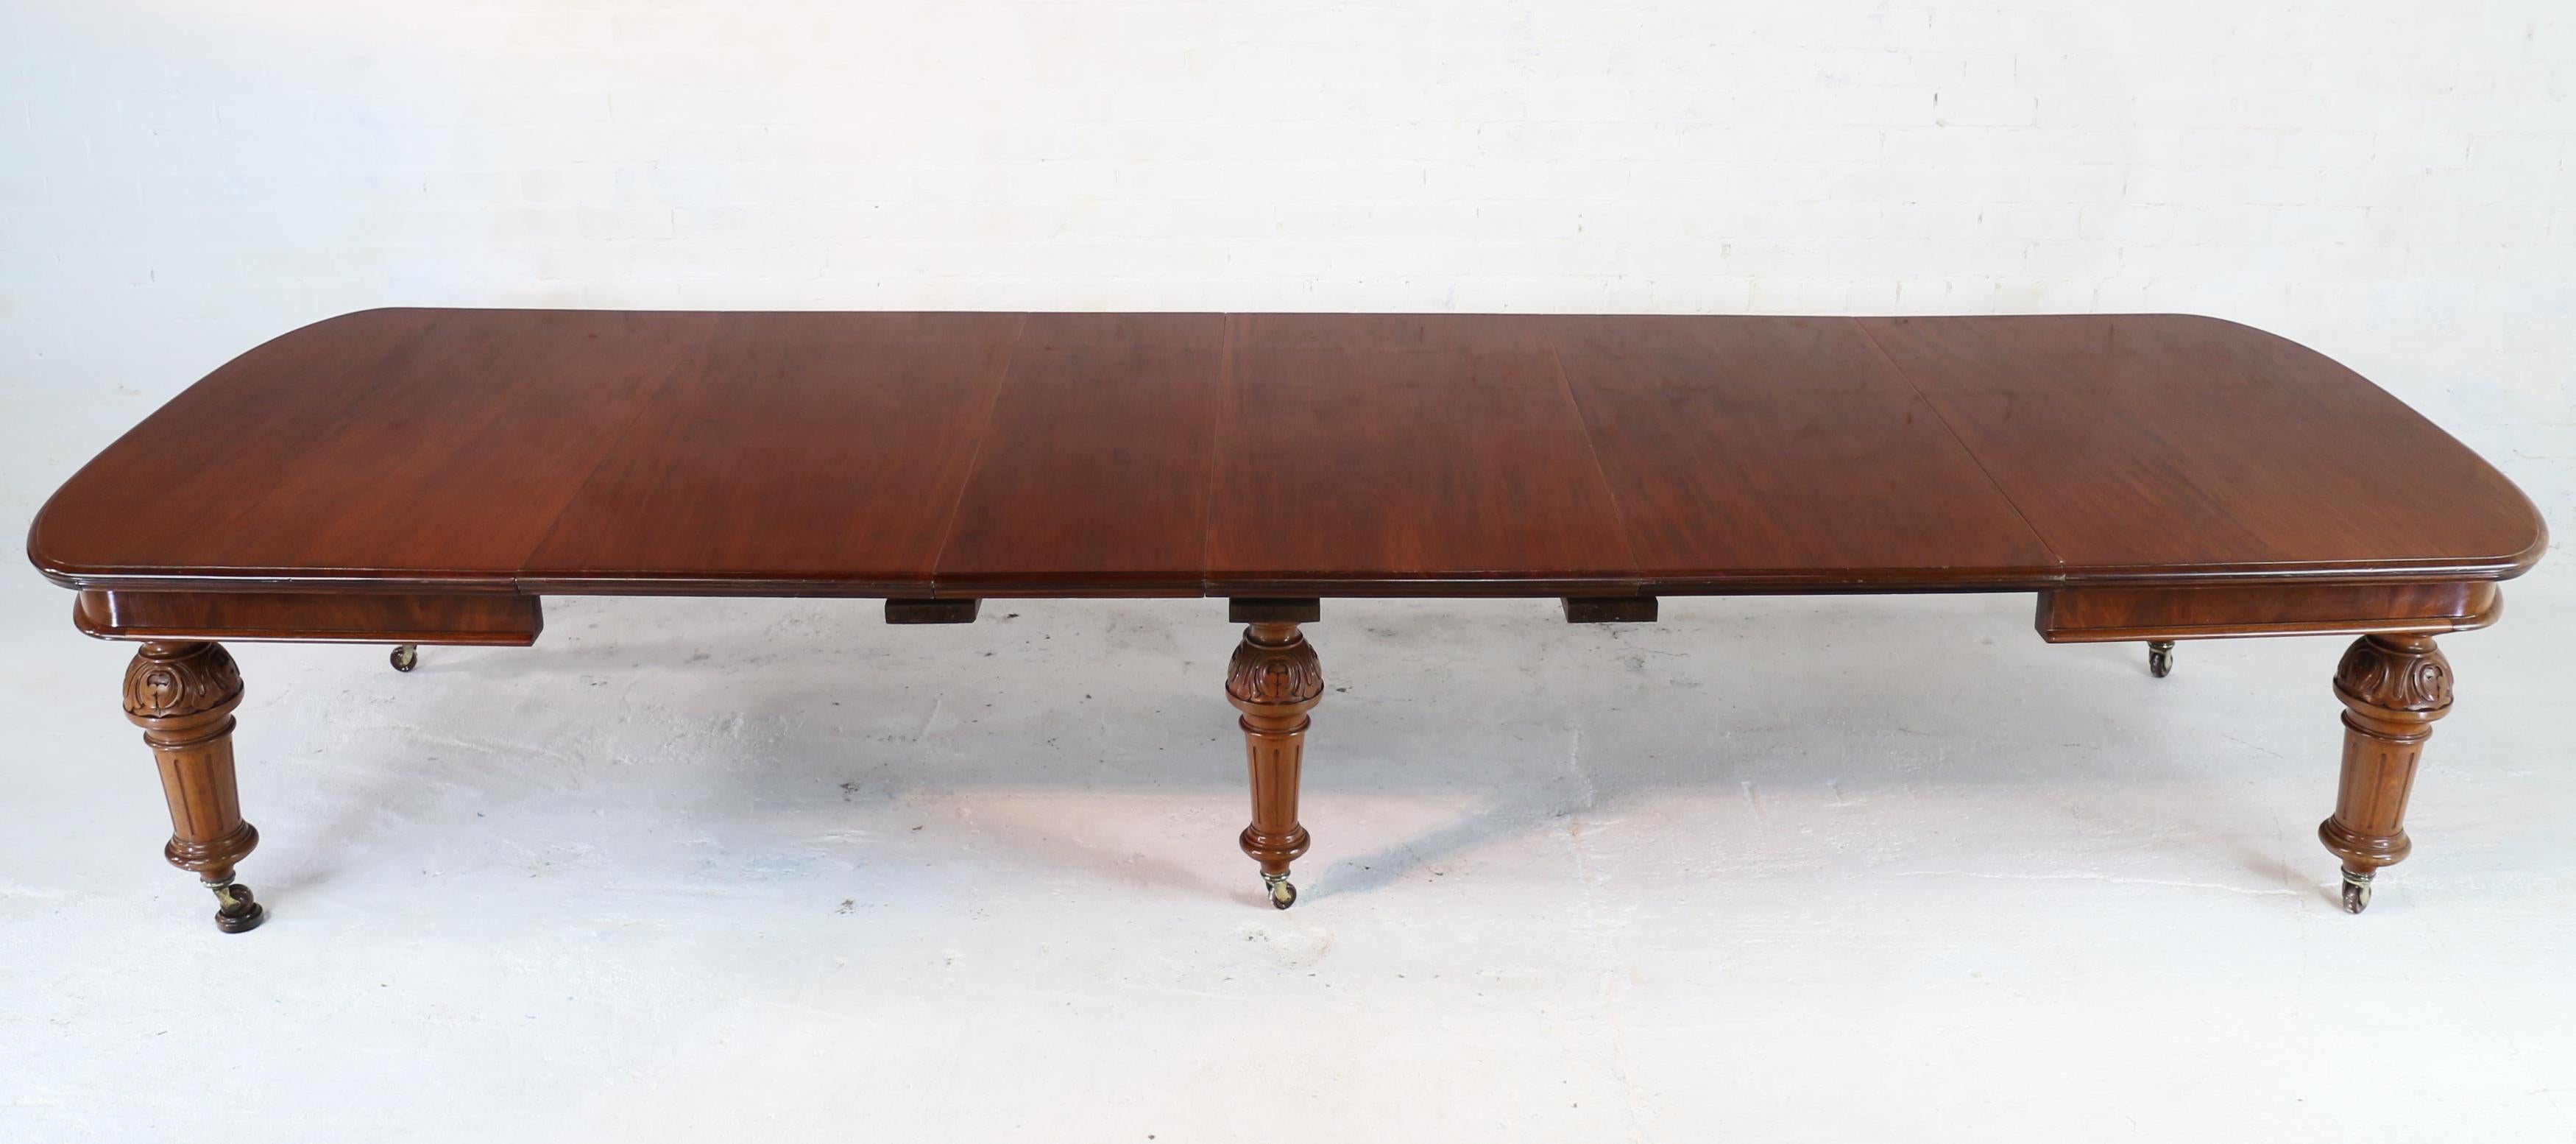 Antique English Victorian Mahogany Extending Dining Table and 4 Leaves, Seats 16 In Good Condition For Sale In Glasgow, GB